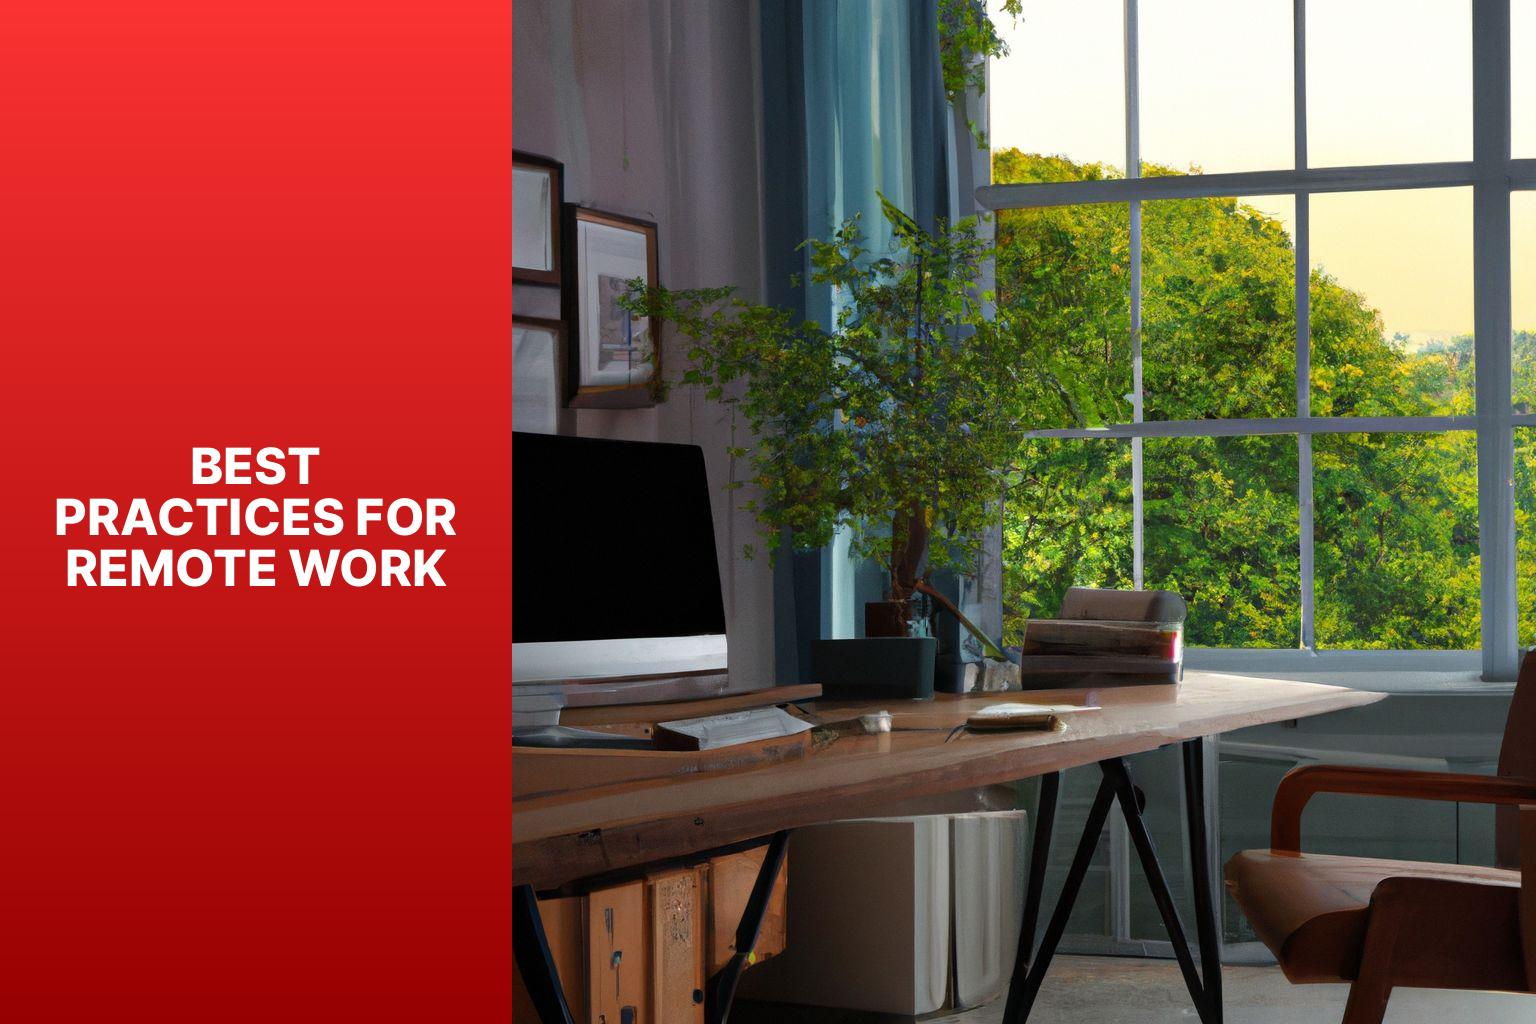 Best Practices for Remote Work - Best Practices for Working Remotely 